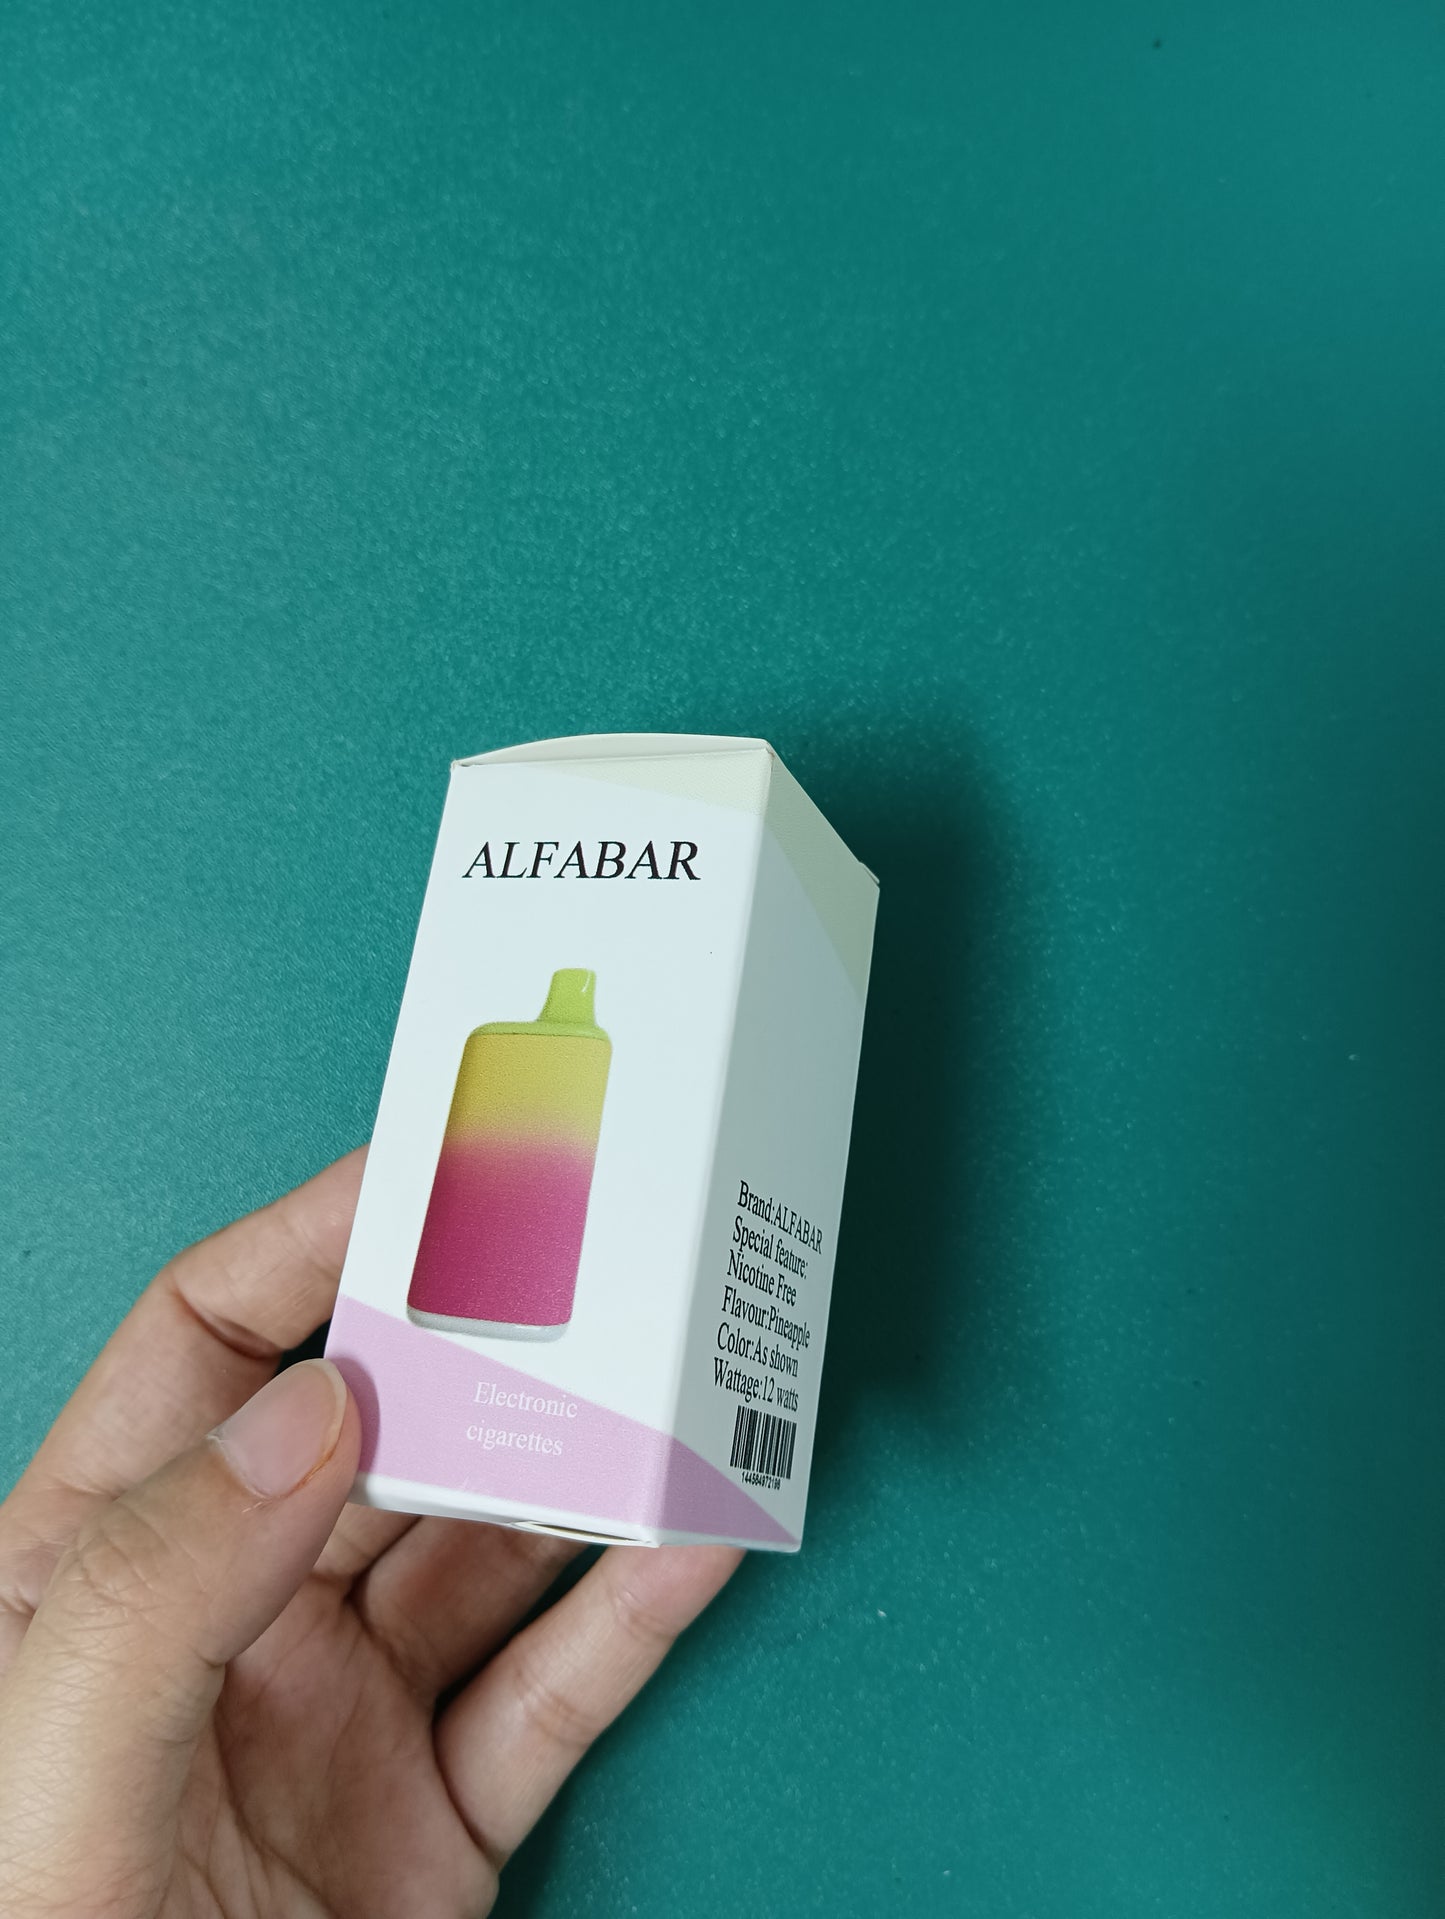 ALFABAR Electronic Cigarette, Pineapple Flavor, 12W, Flameless, Eco-Friendly, USB Charging, Stylish & Lightweight Design, Unisex, Ideal for Gifting